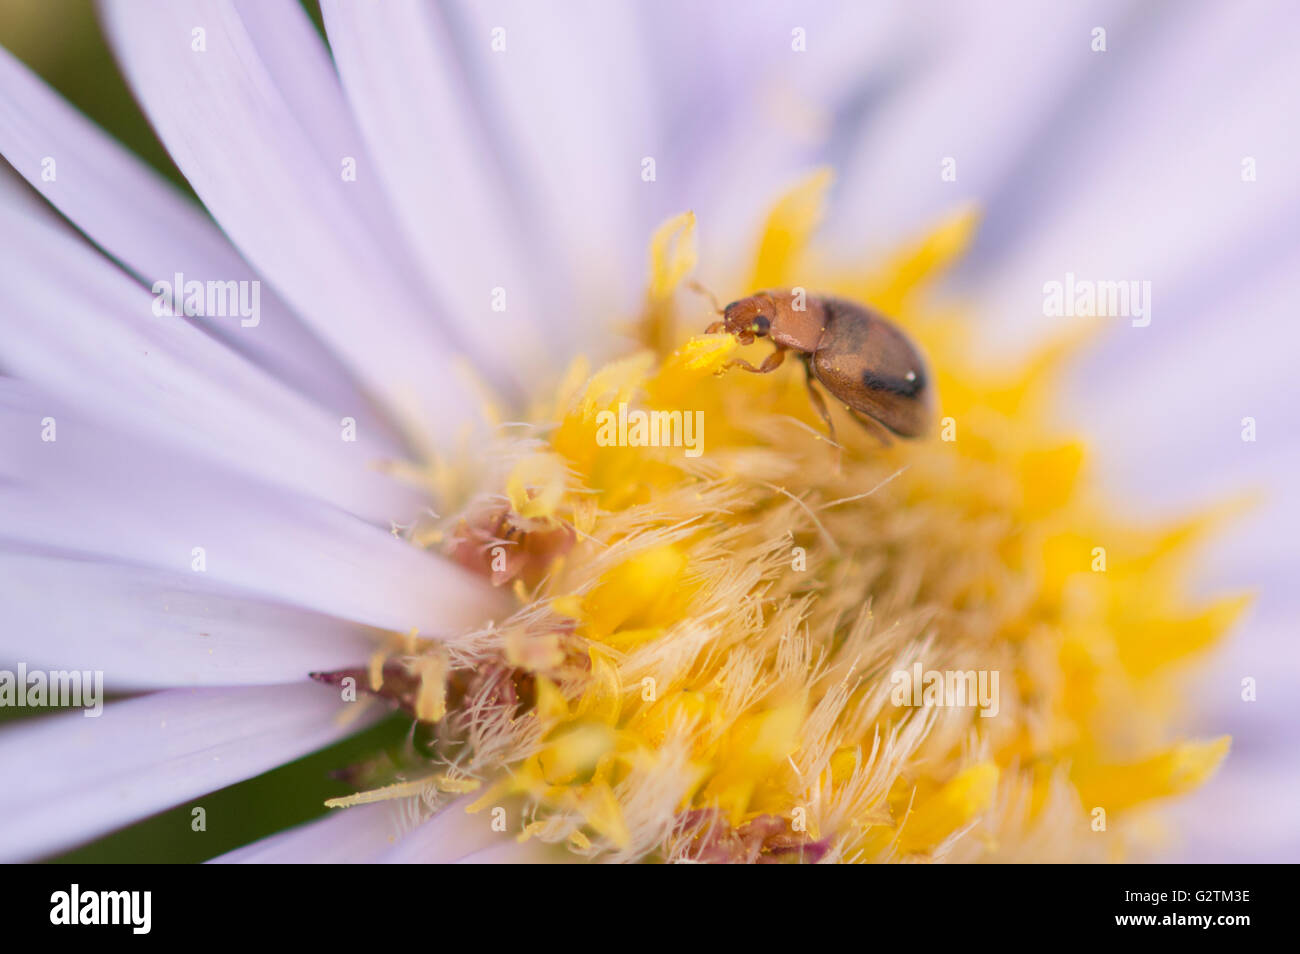 A species of Sap Beetle (Nitidulidae) on a Michaelmas daisy. Stock Photo